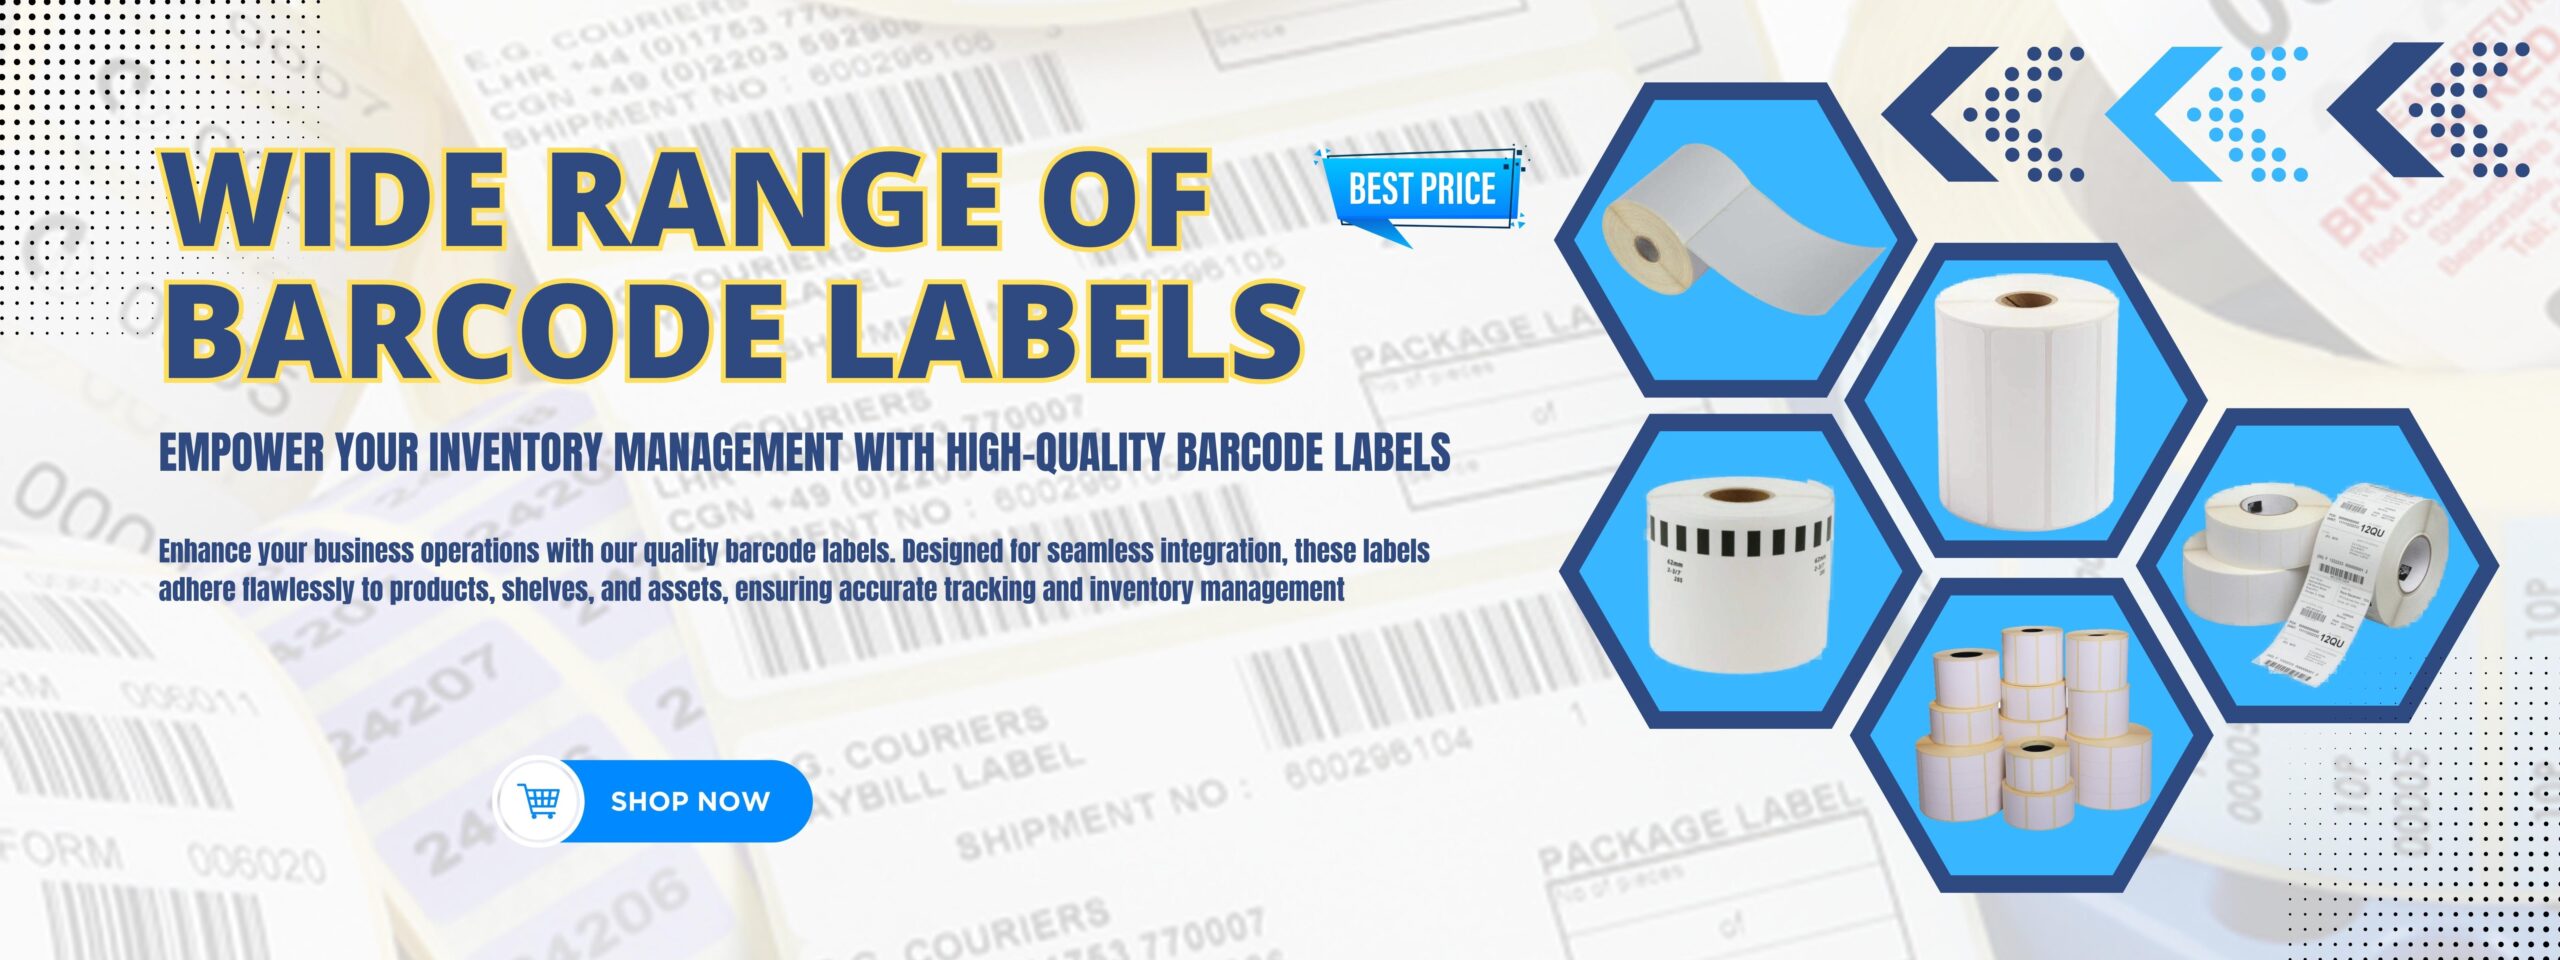 Barcode Labels Banner 6400X2400